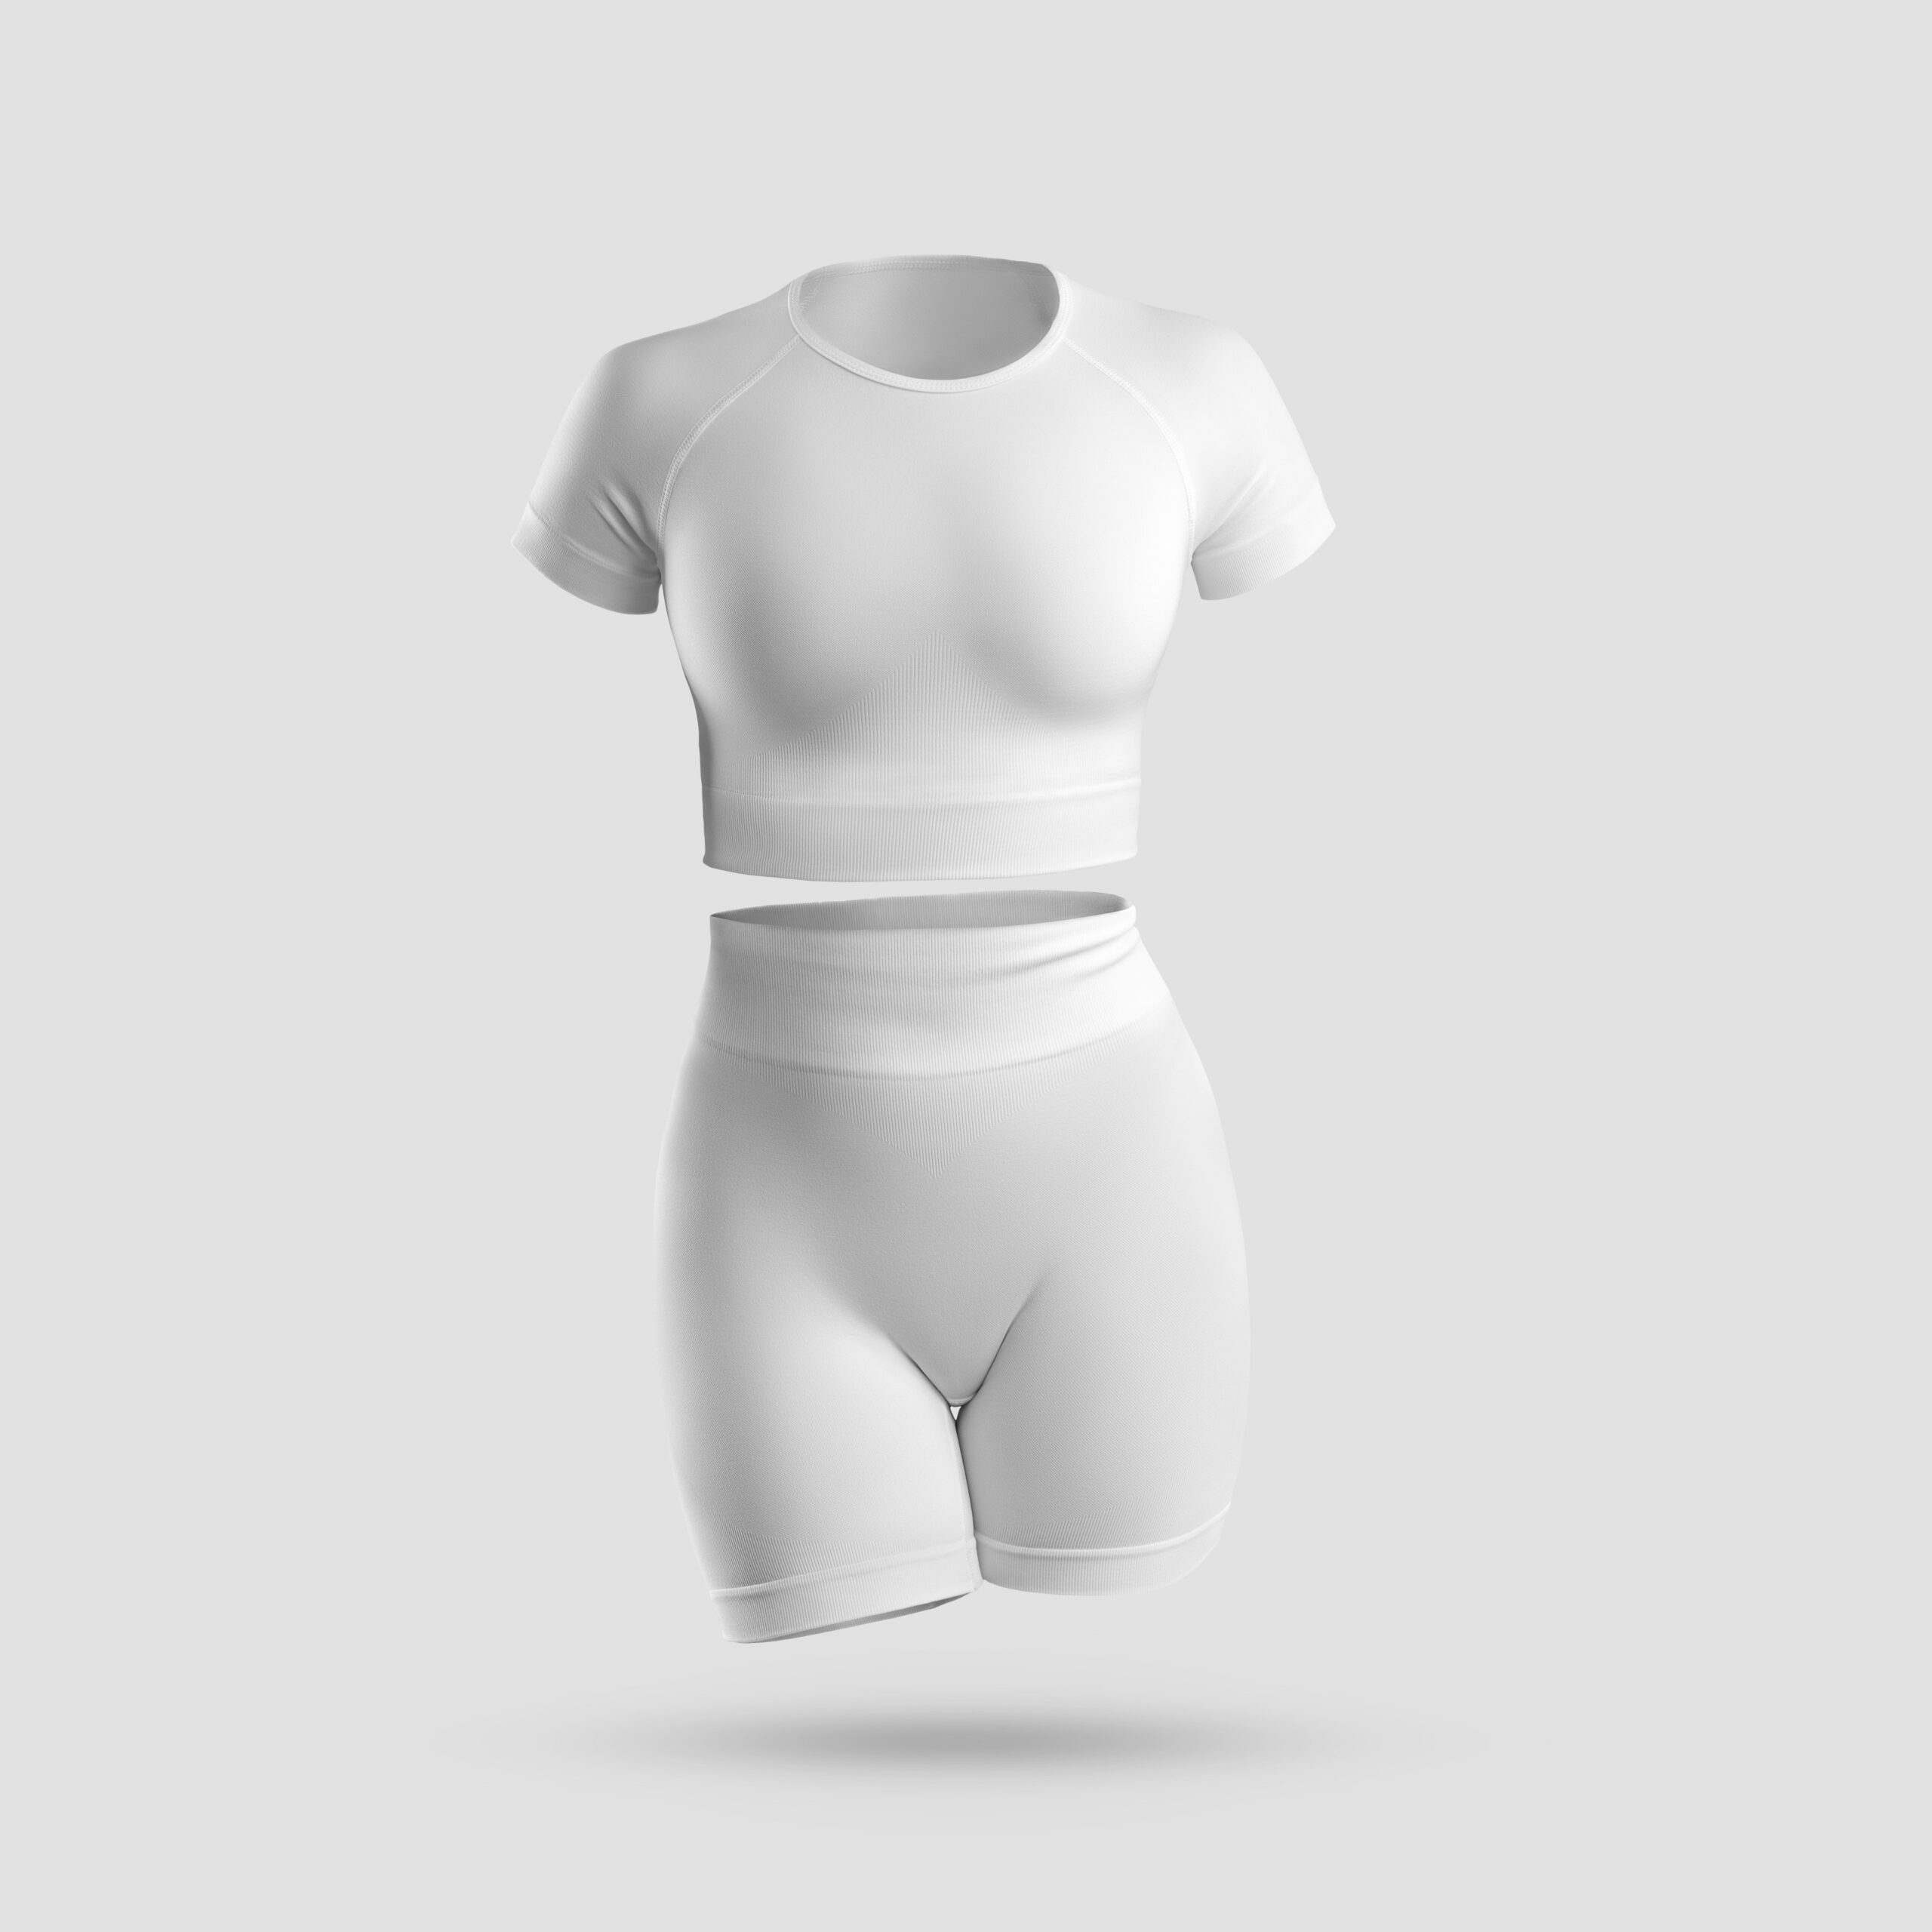 Global Compression Garments and Stockings Market to Witness